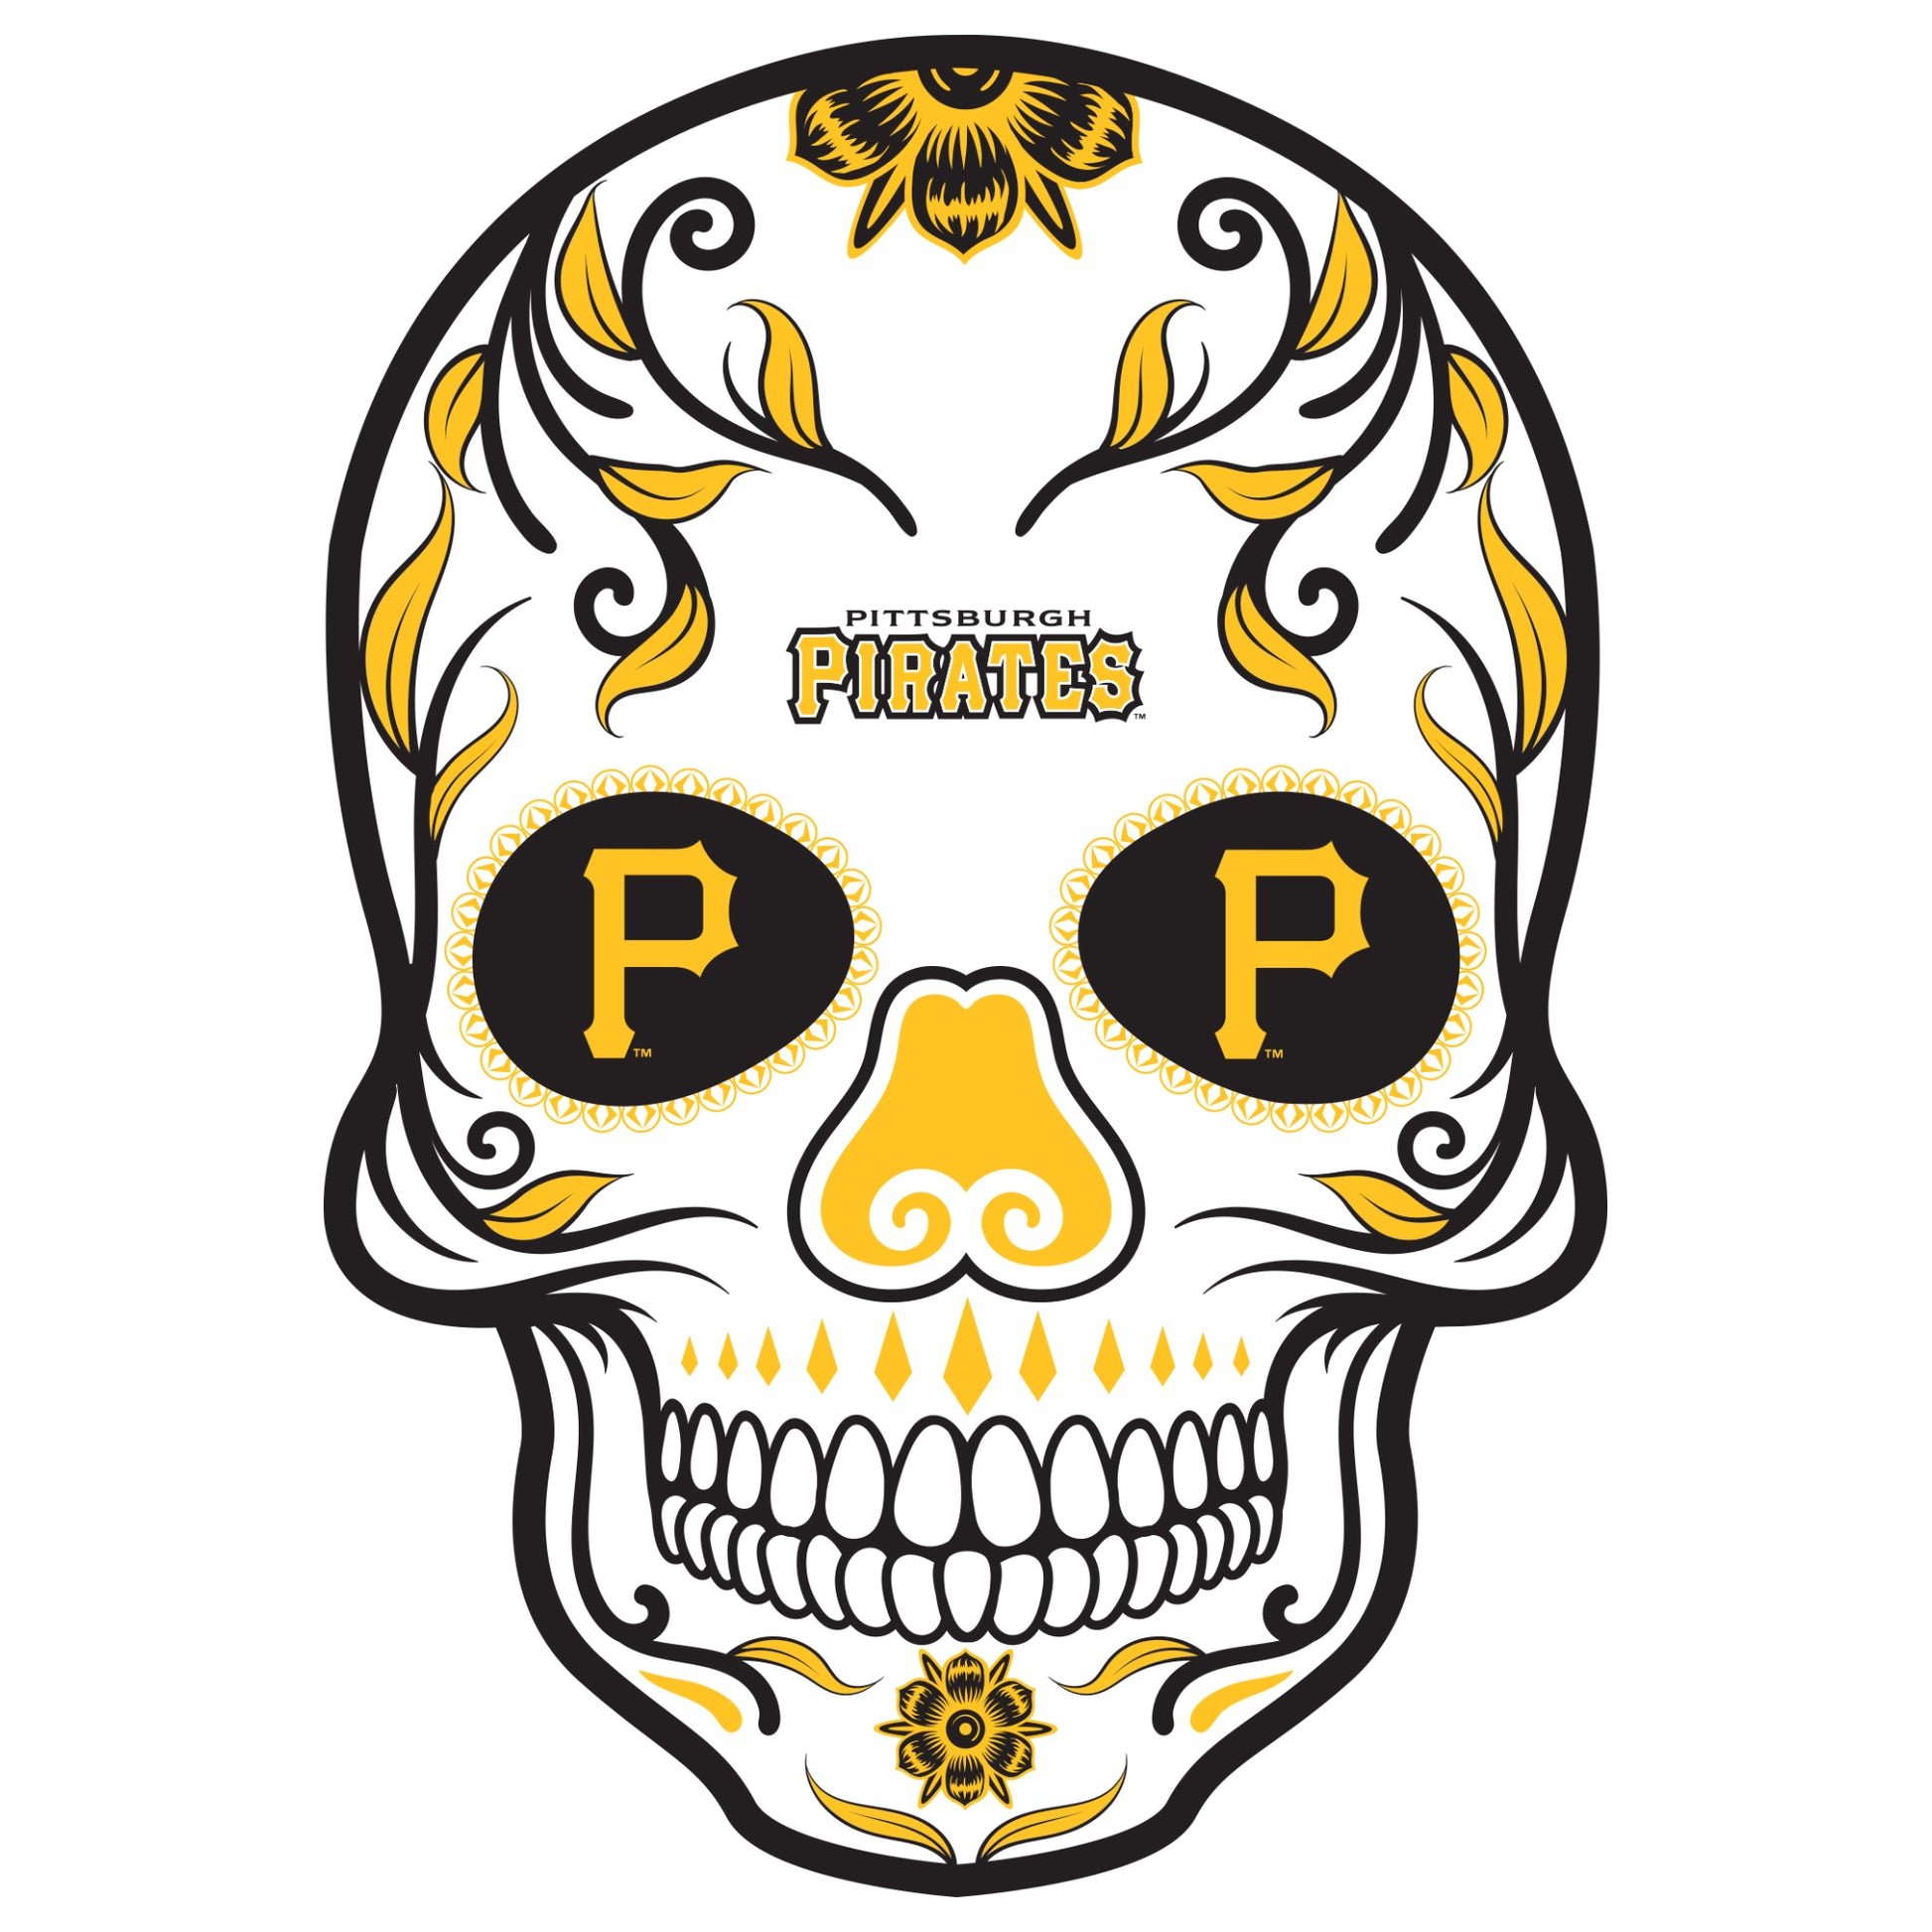 Officially Licensed MLB All-Star Door Mat - Pittsburgh Pirates